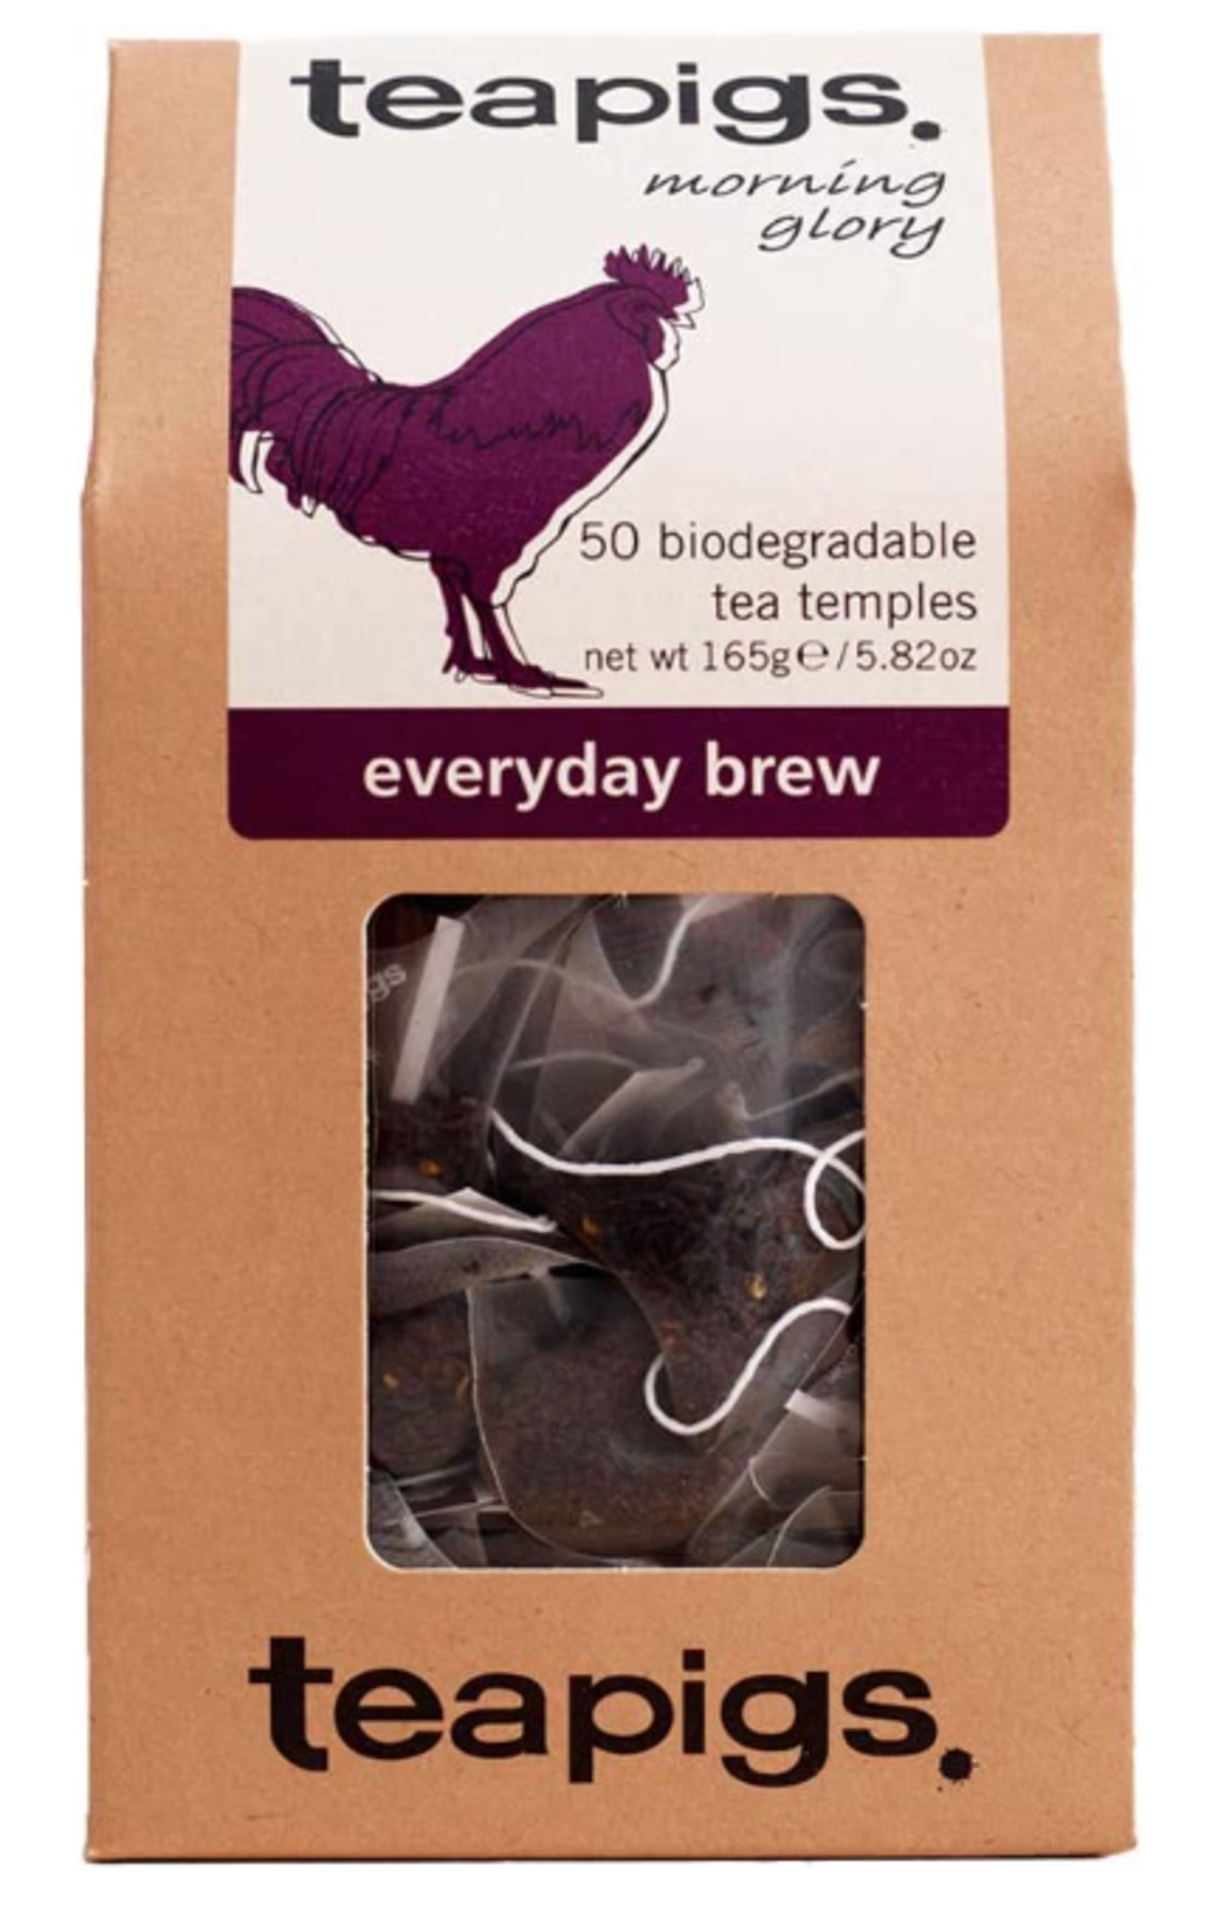 RRP £1597 (Approx. Count 193)(F55) spW56K6435m 40 x Teapigs Silver Tips White Tea Bags Made with